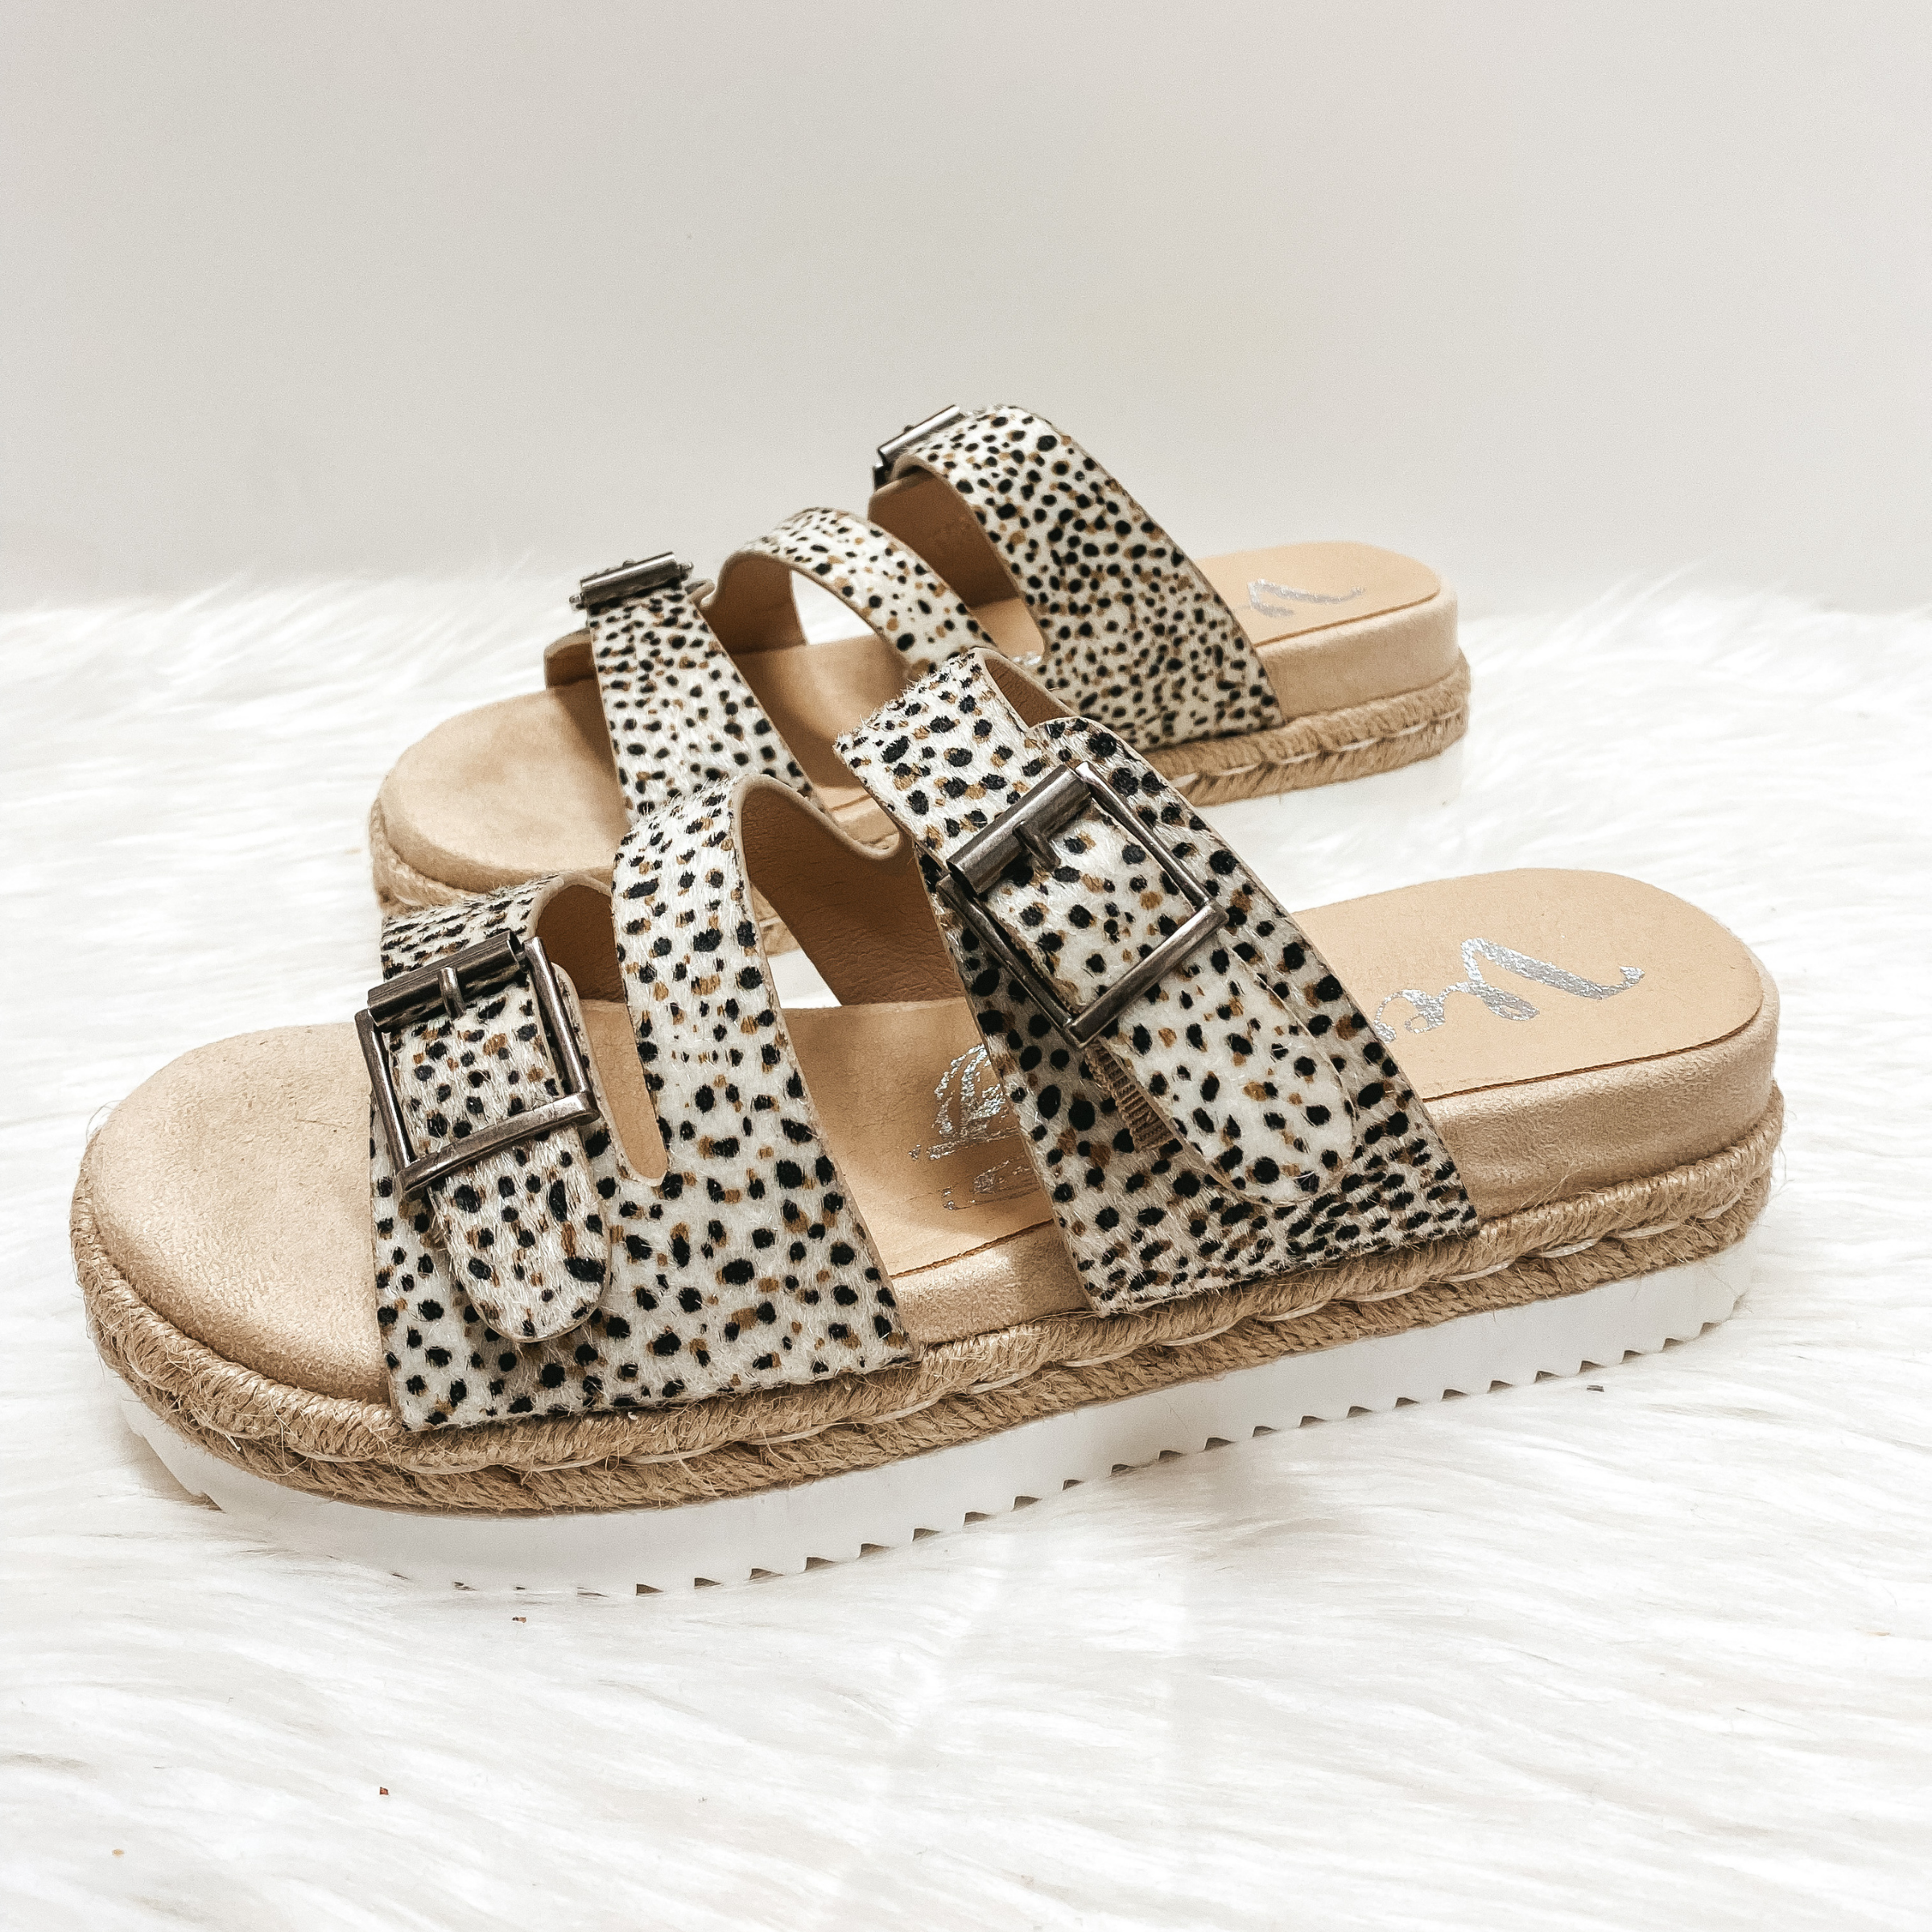 Very G | Traveling Places Strappy Faux Hide Platform Sandals with Buckles in Dotted Beige - Giddy Up Glamour Boutique